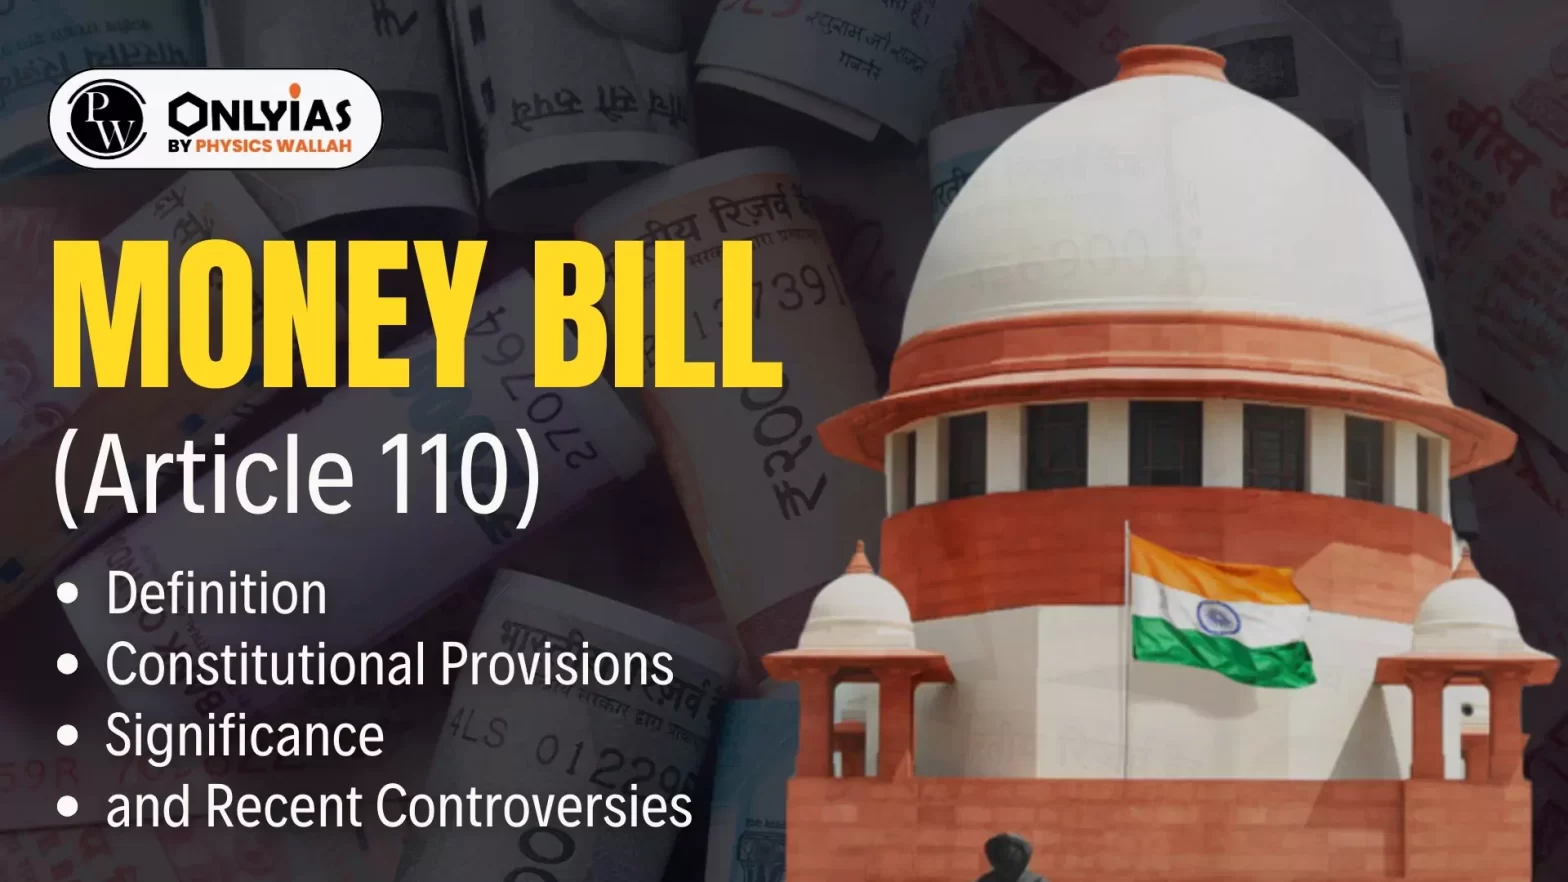 Money Bill (Article 110): Definition, Constitutional Provisions, Significance, and Recent Controversies